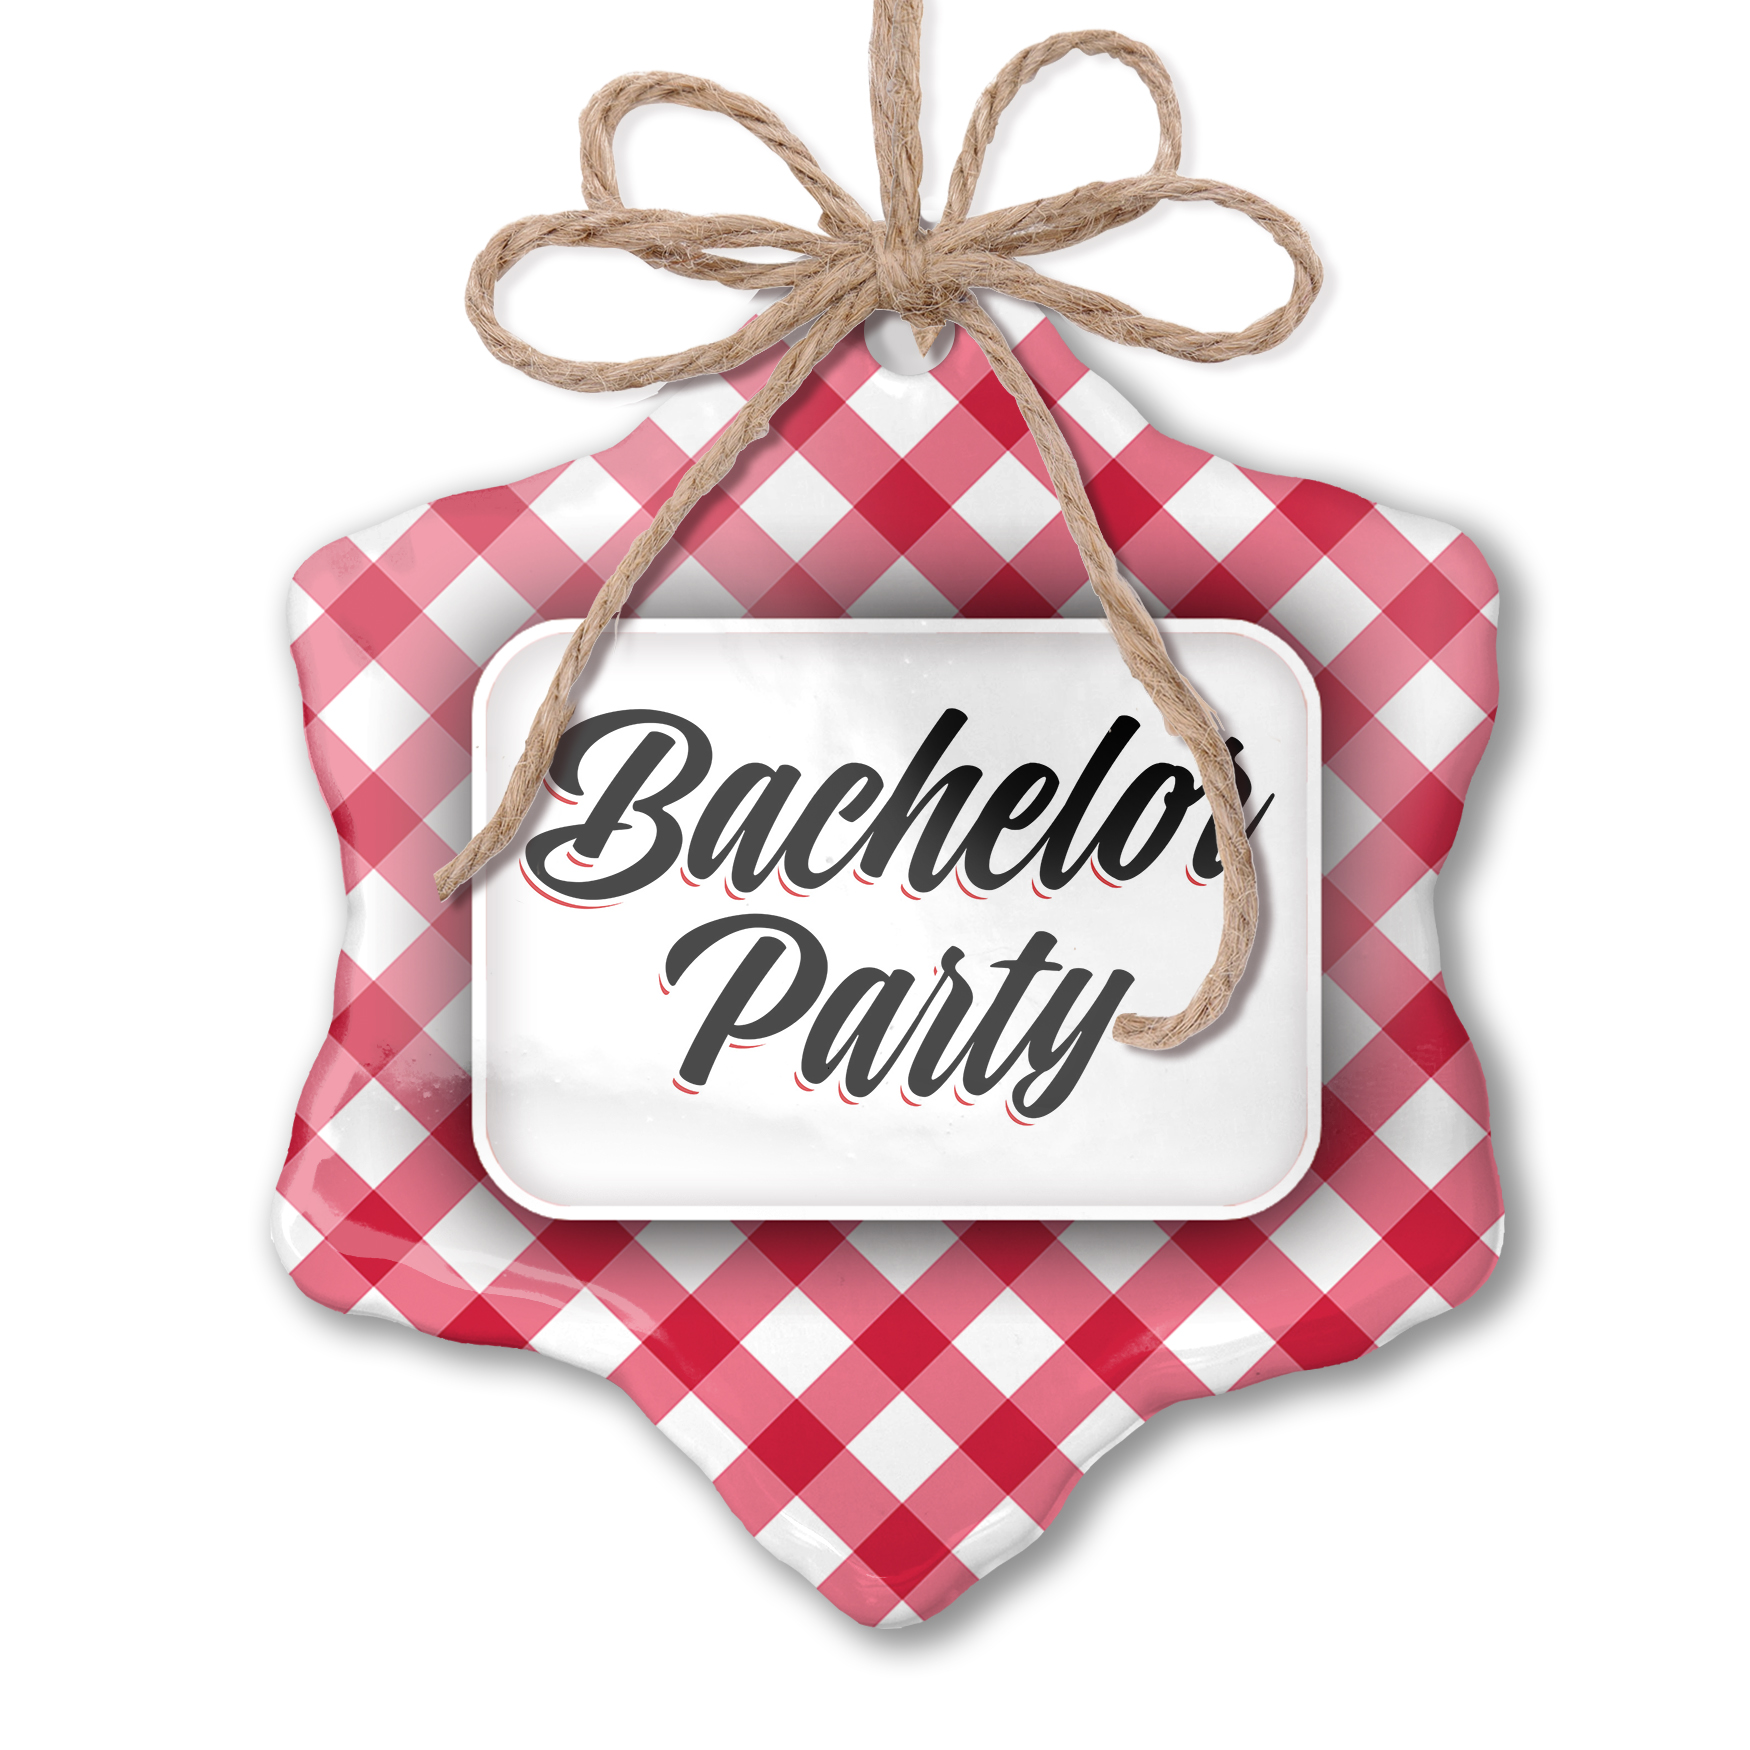 Christmas Ornament Vintage Lettering Bachelor Party Red plaid Neonblond - image 1 of 1